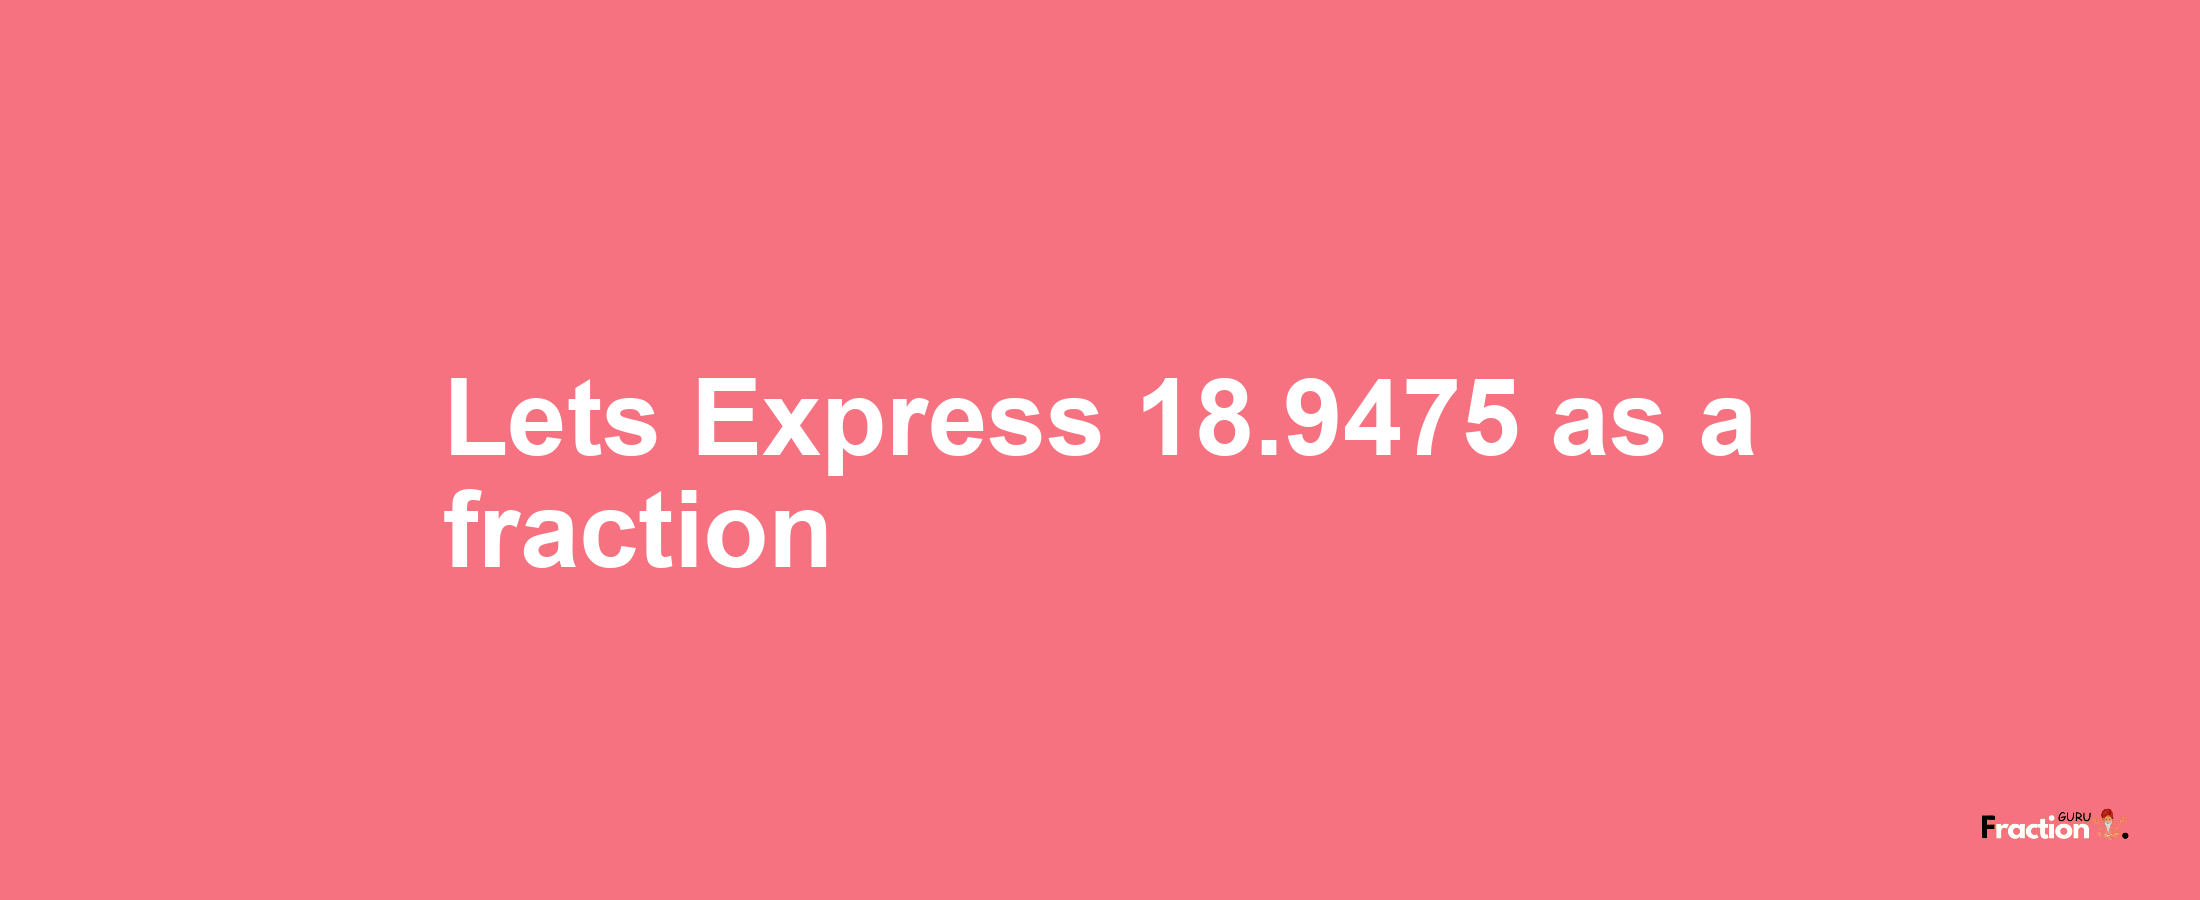 Lets Express 18.9475 as afraction